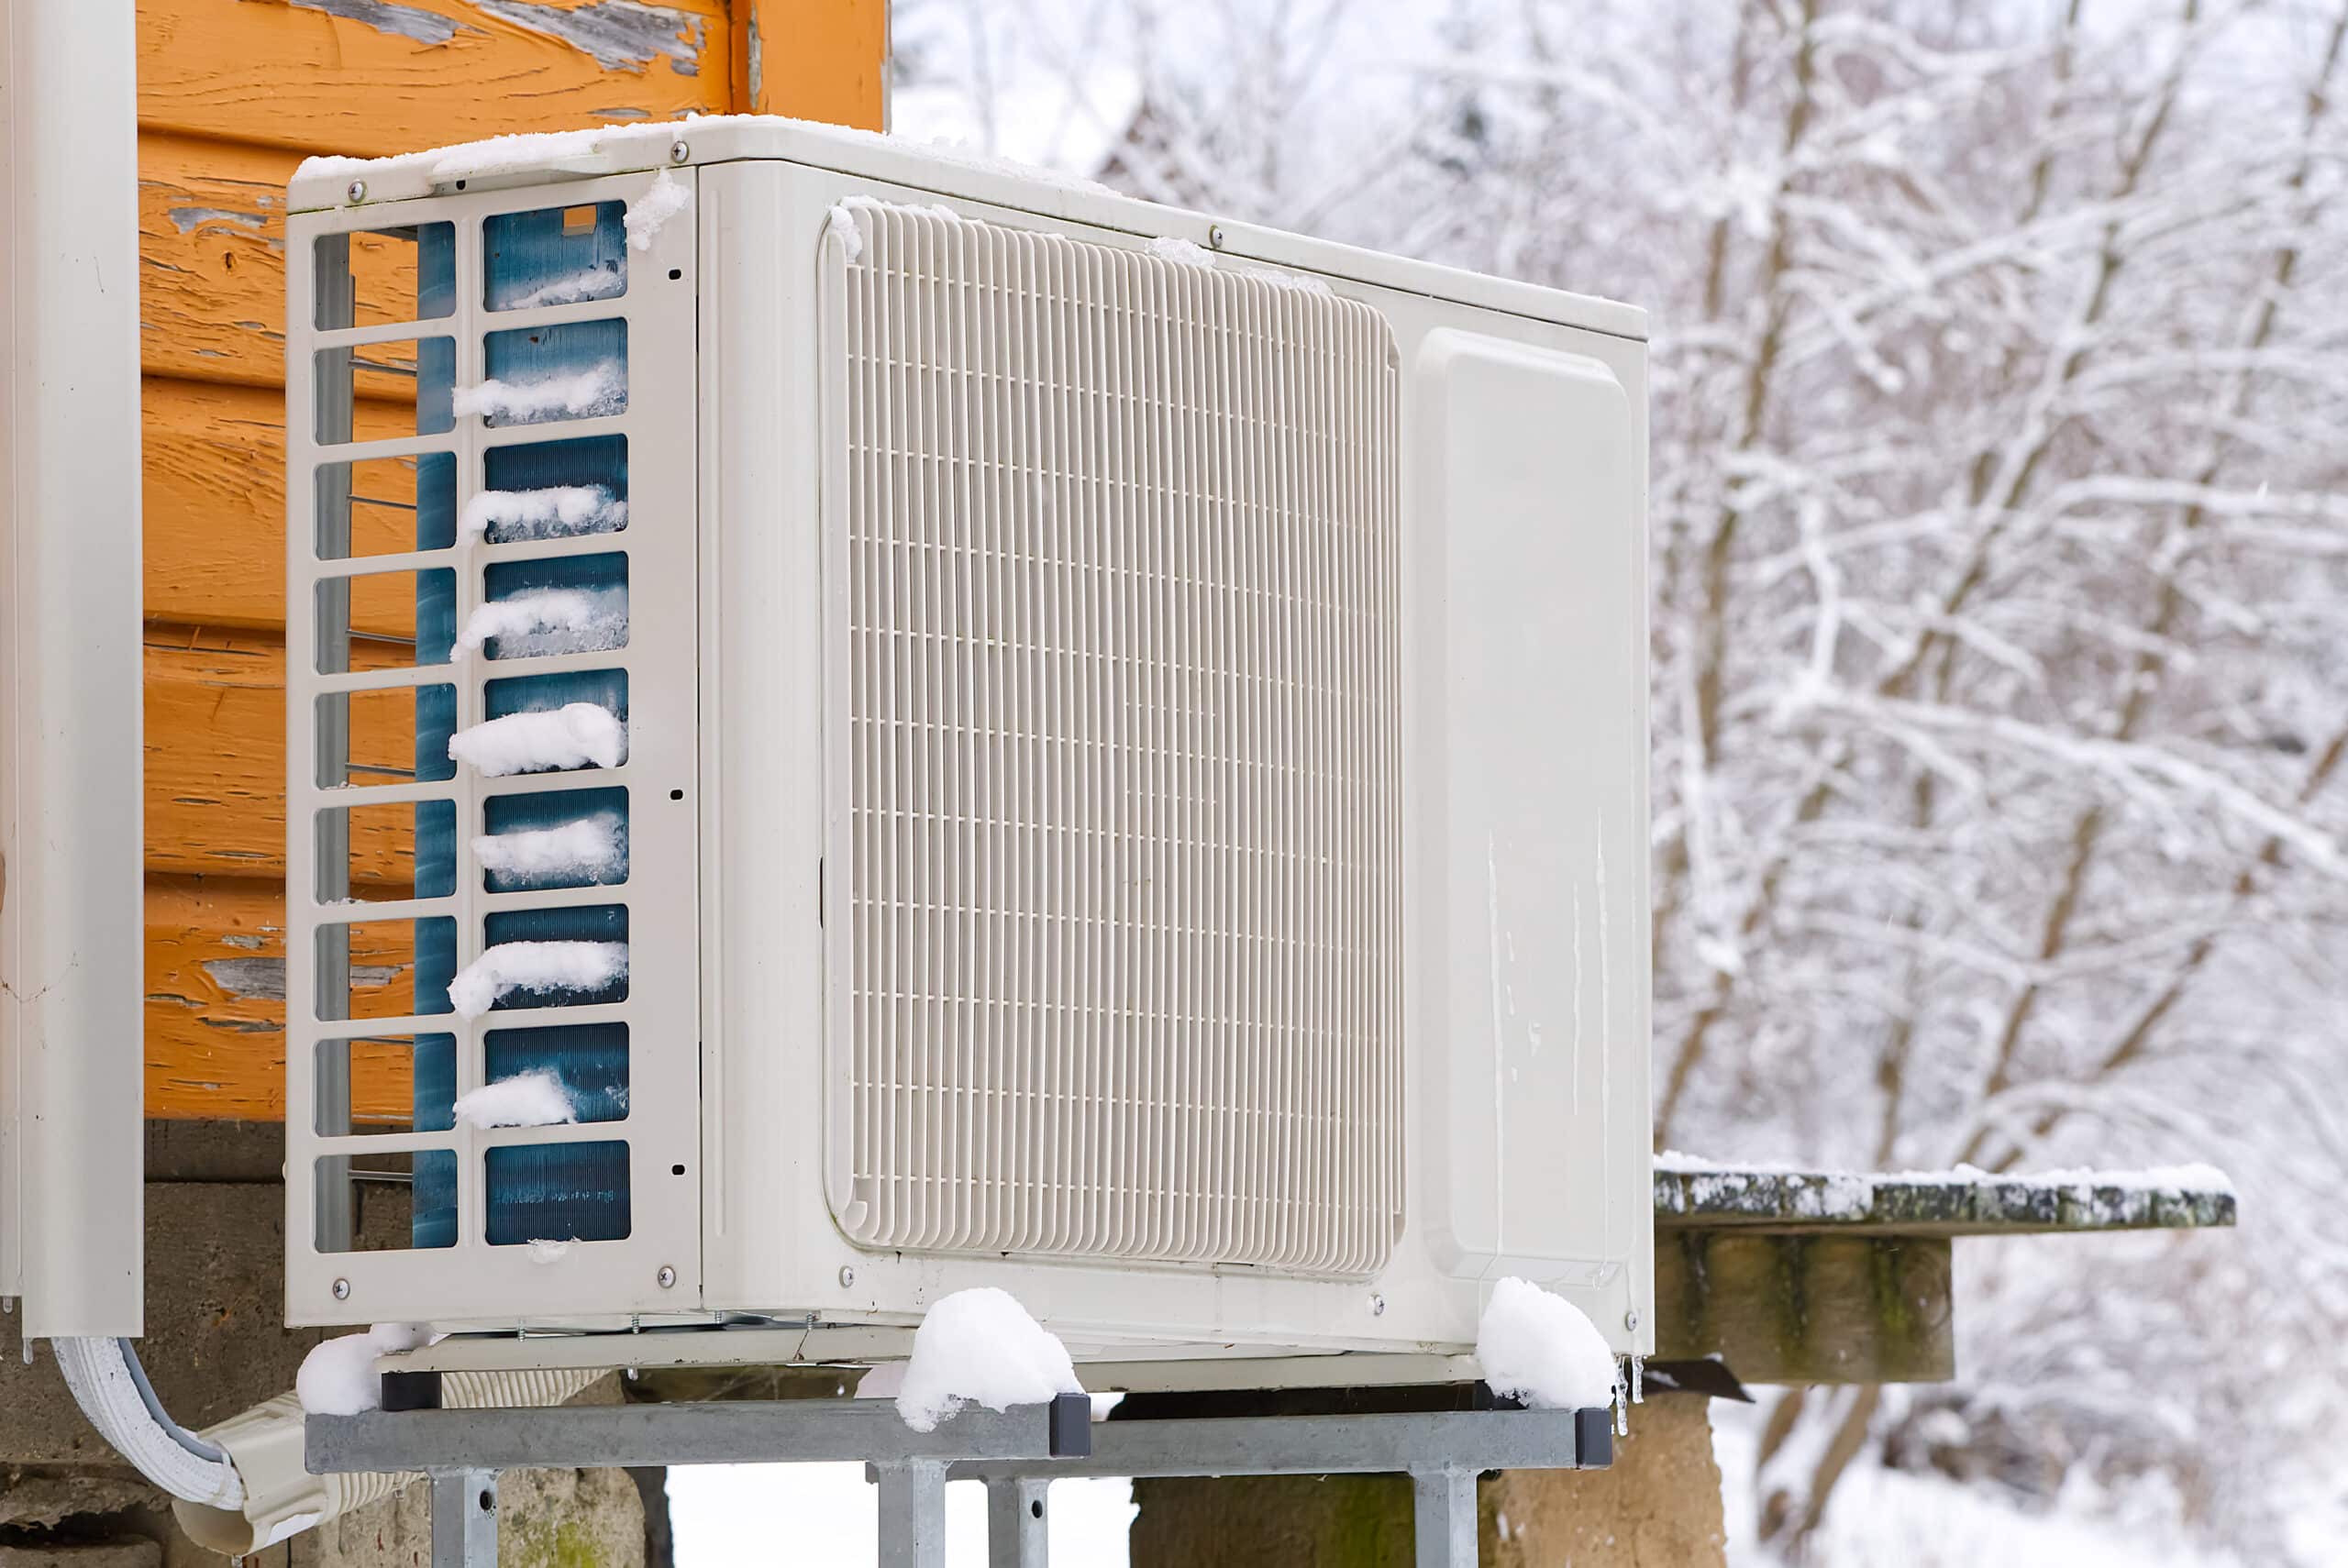 An outdoor condenser unit is covered in ice and snow 